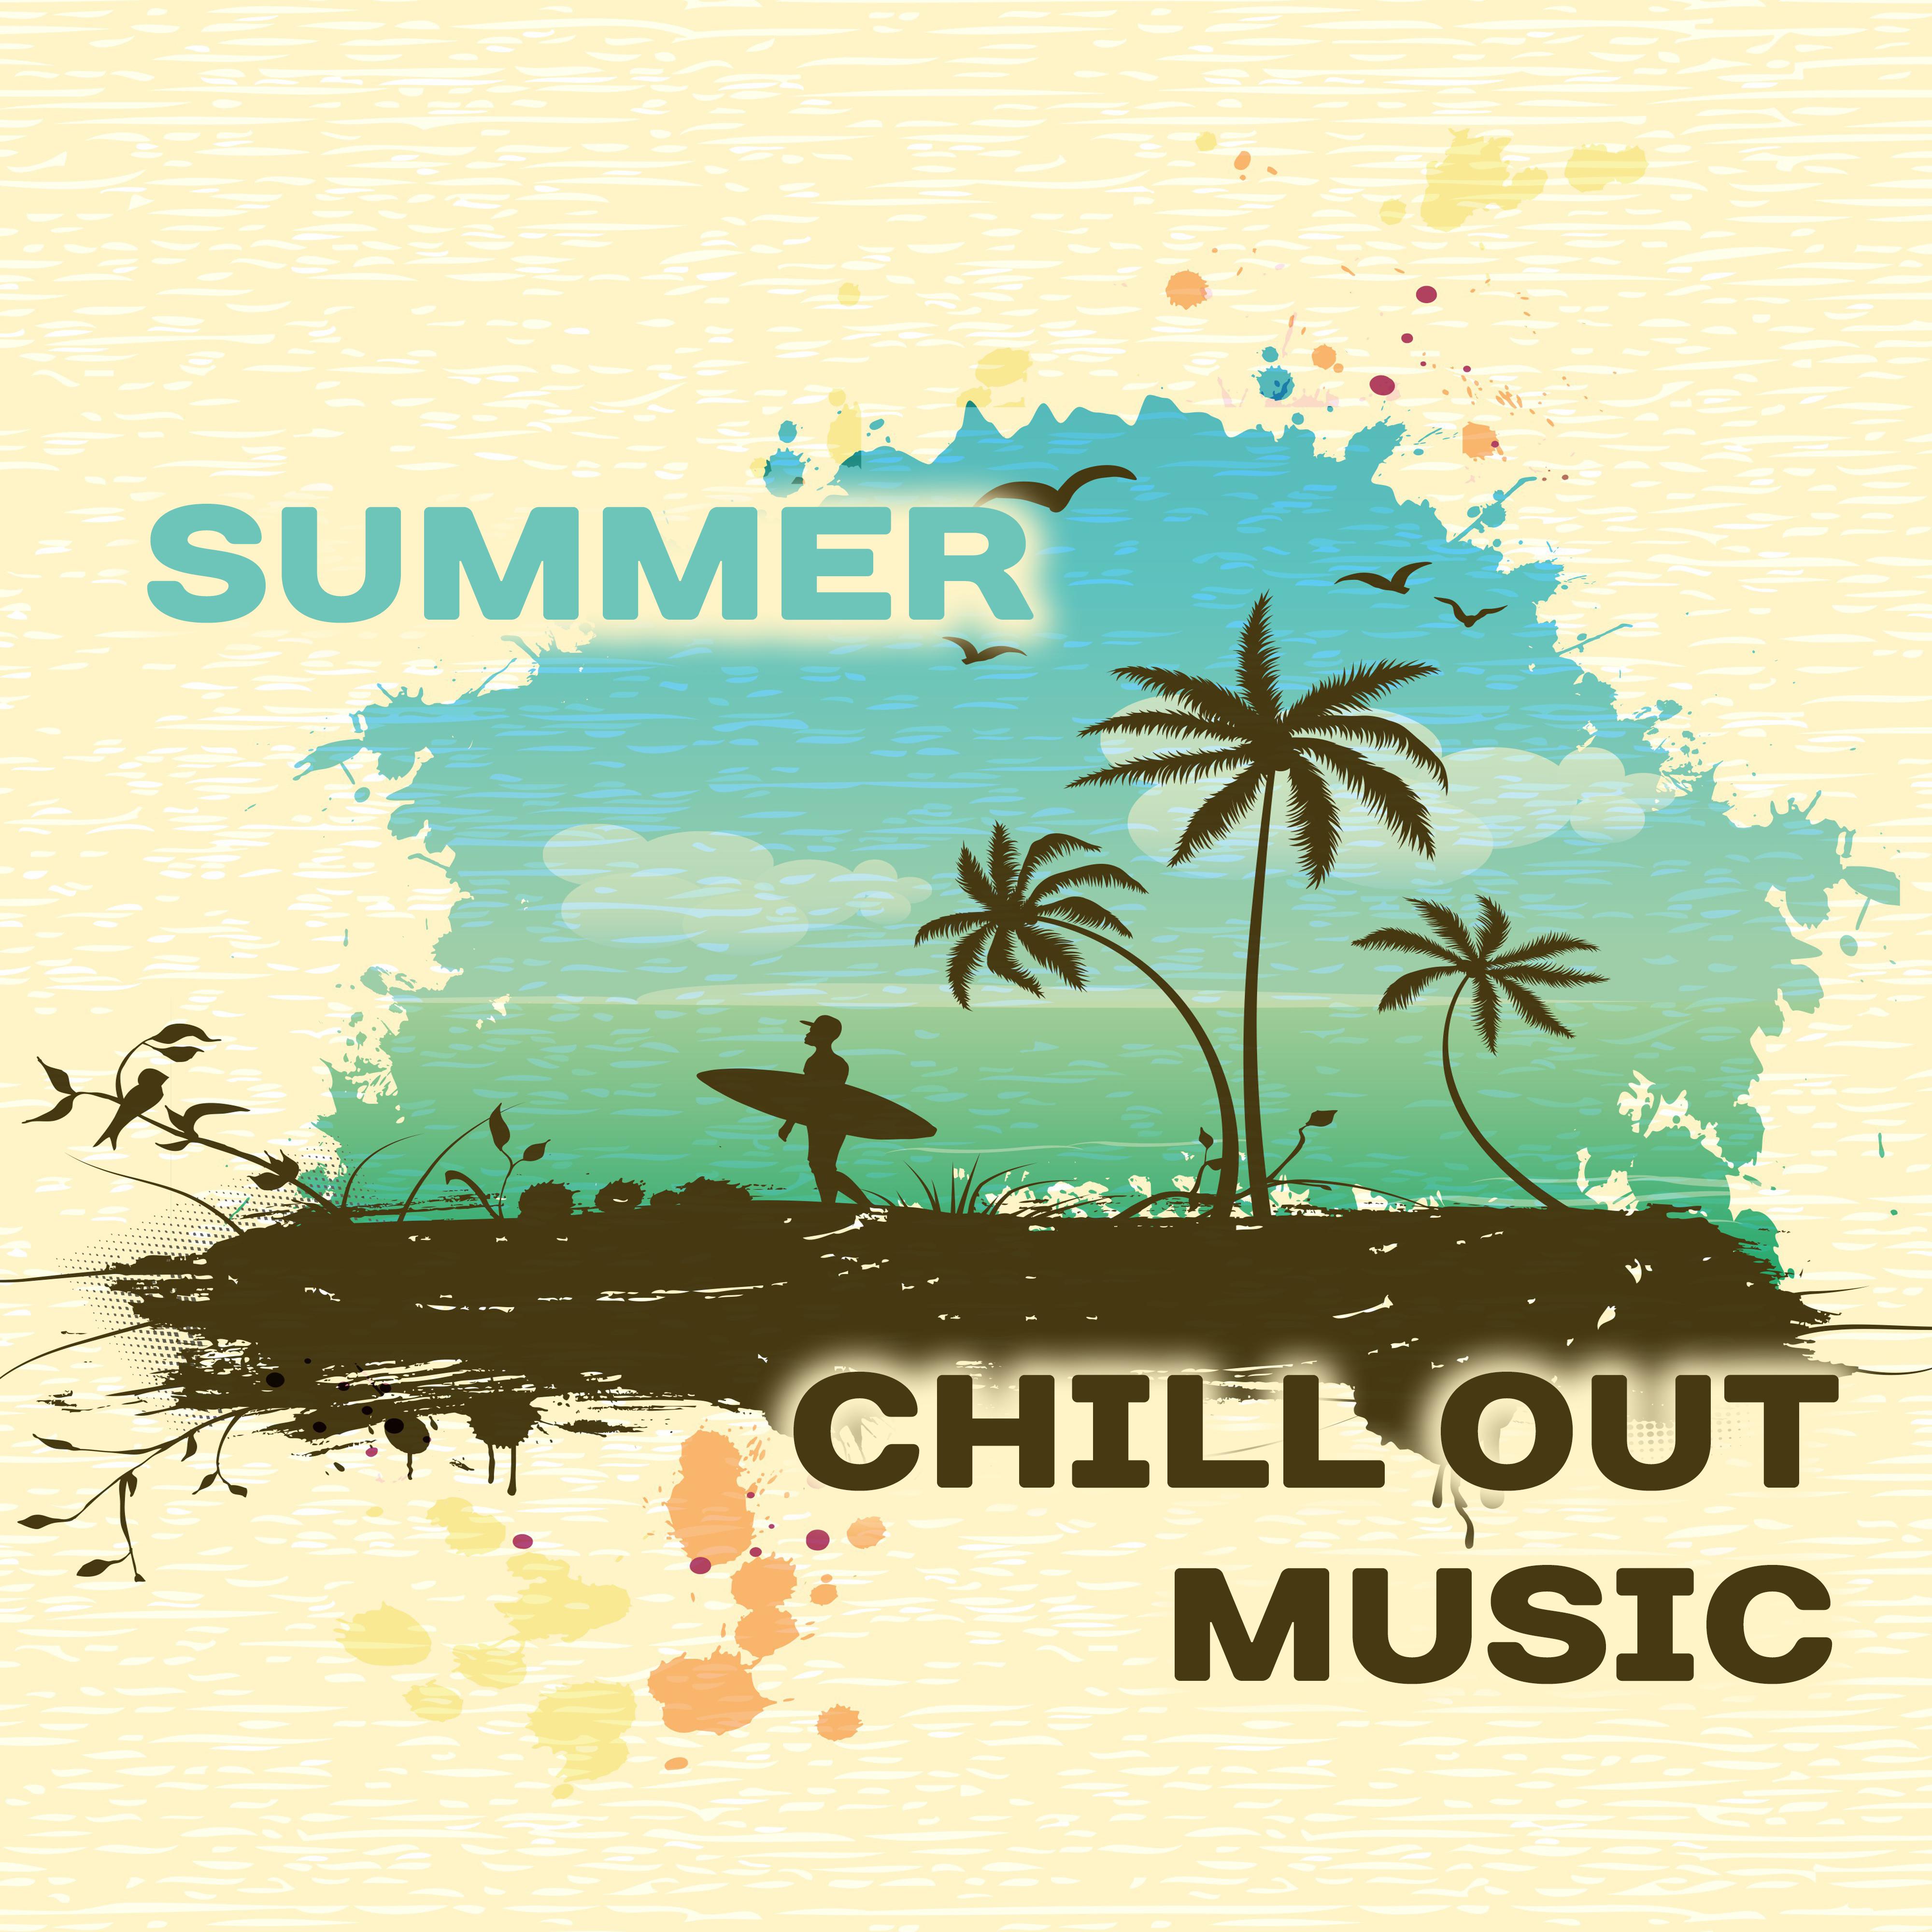 Summer Chill Out Music  Beach Chill, Relax, Ibiza Lounge, Party Night, Dancefloor,  Vibes, Colorful Drinks Under Palms